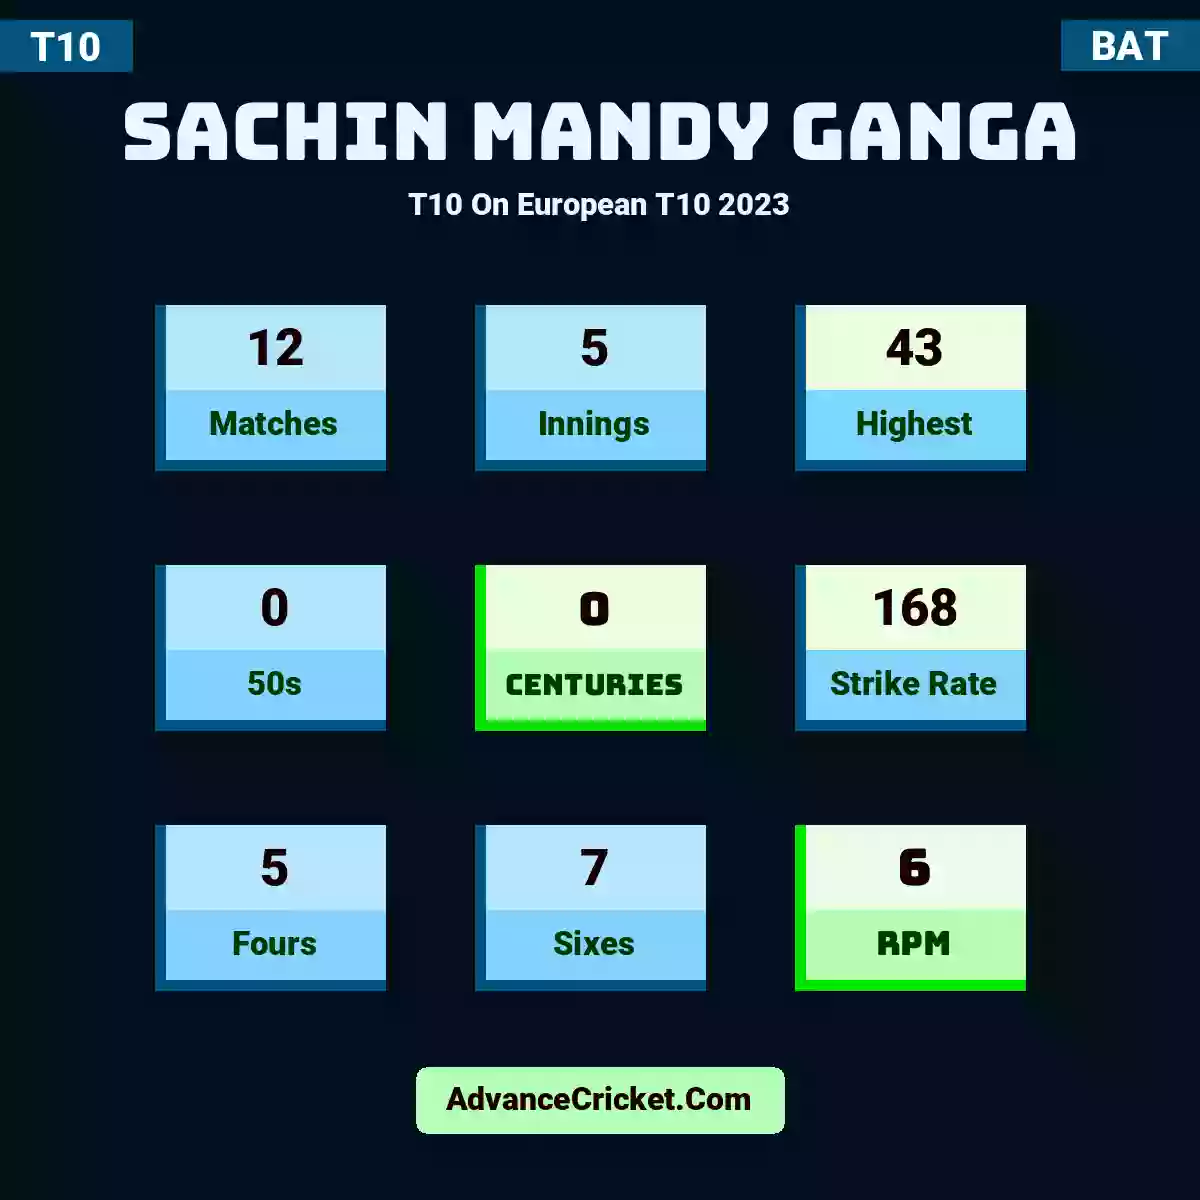 Sachin Mandy Ganga T10  On European T10 2023, Sachin Mandy Ganga played 12 matches, scored 43 runs as highest, 0 half-centuries, and 0 centuries, with a strike rate of 168. S.MGanga hit 5 fours and 7 sixes, with an RPM of 6.